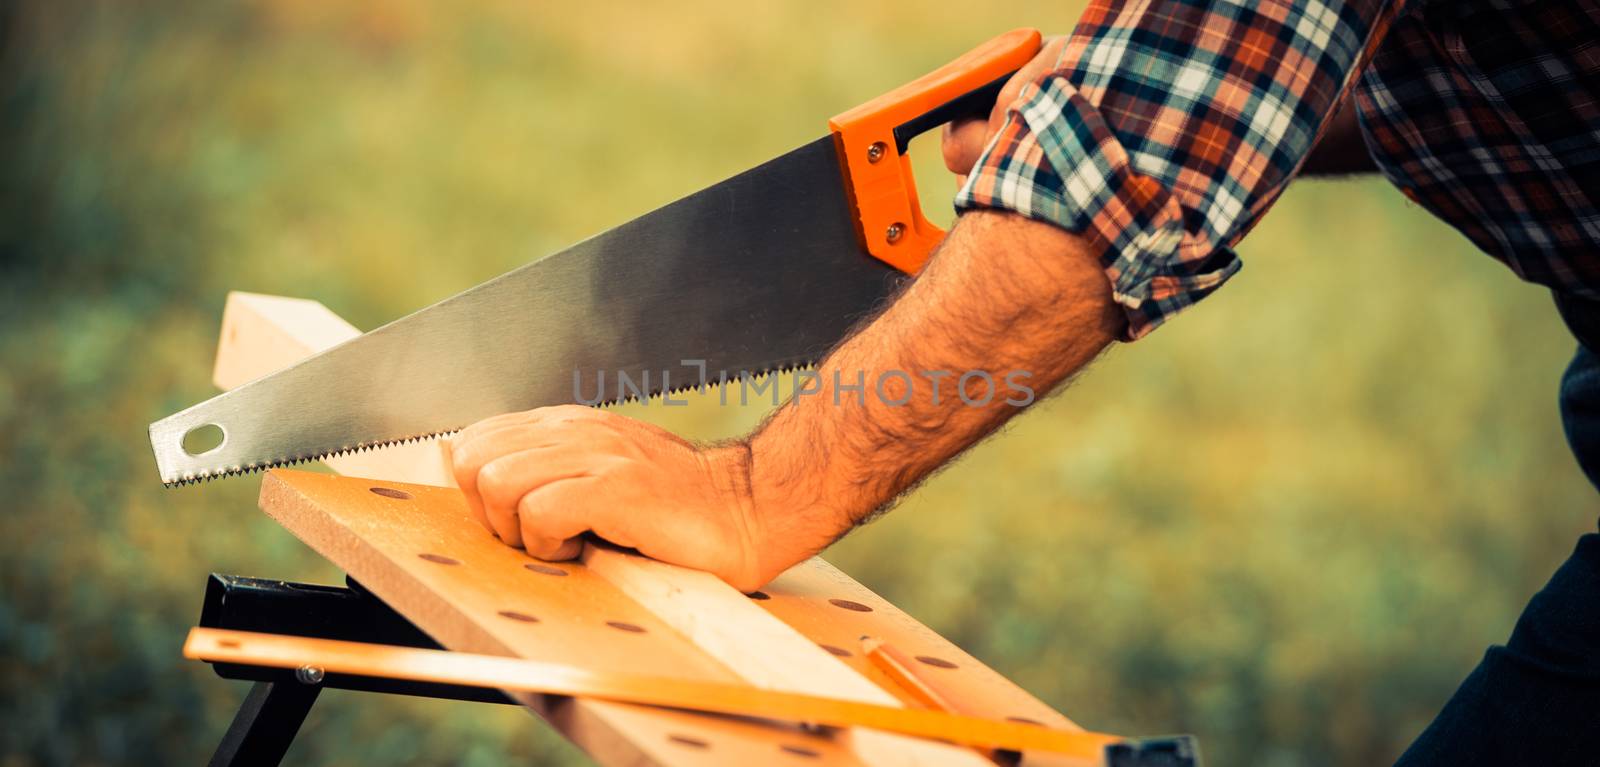 Carpenter sawing a wooden square with a wood saw outdoor